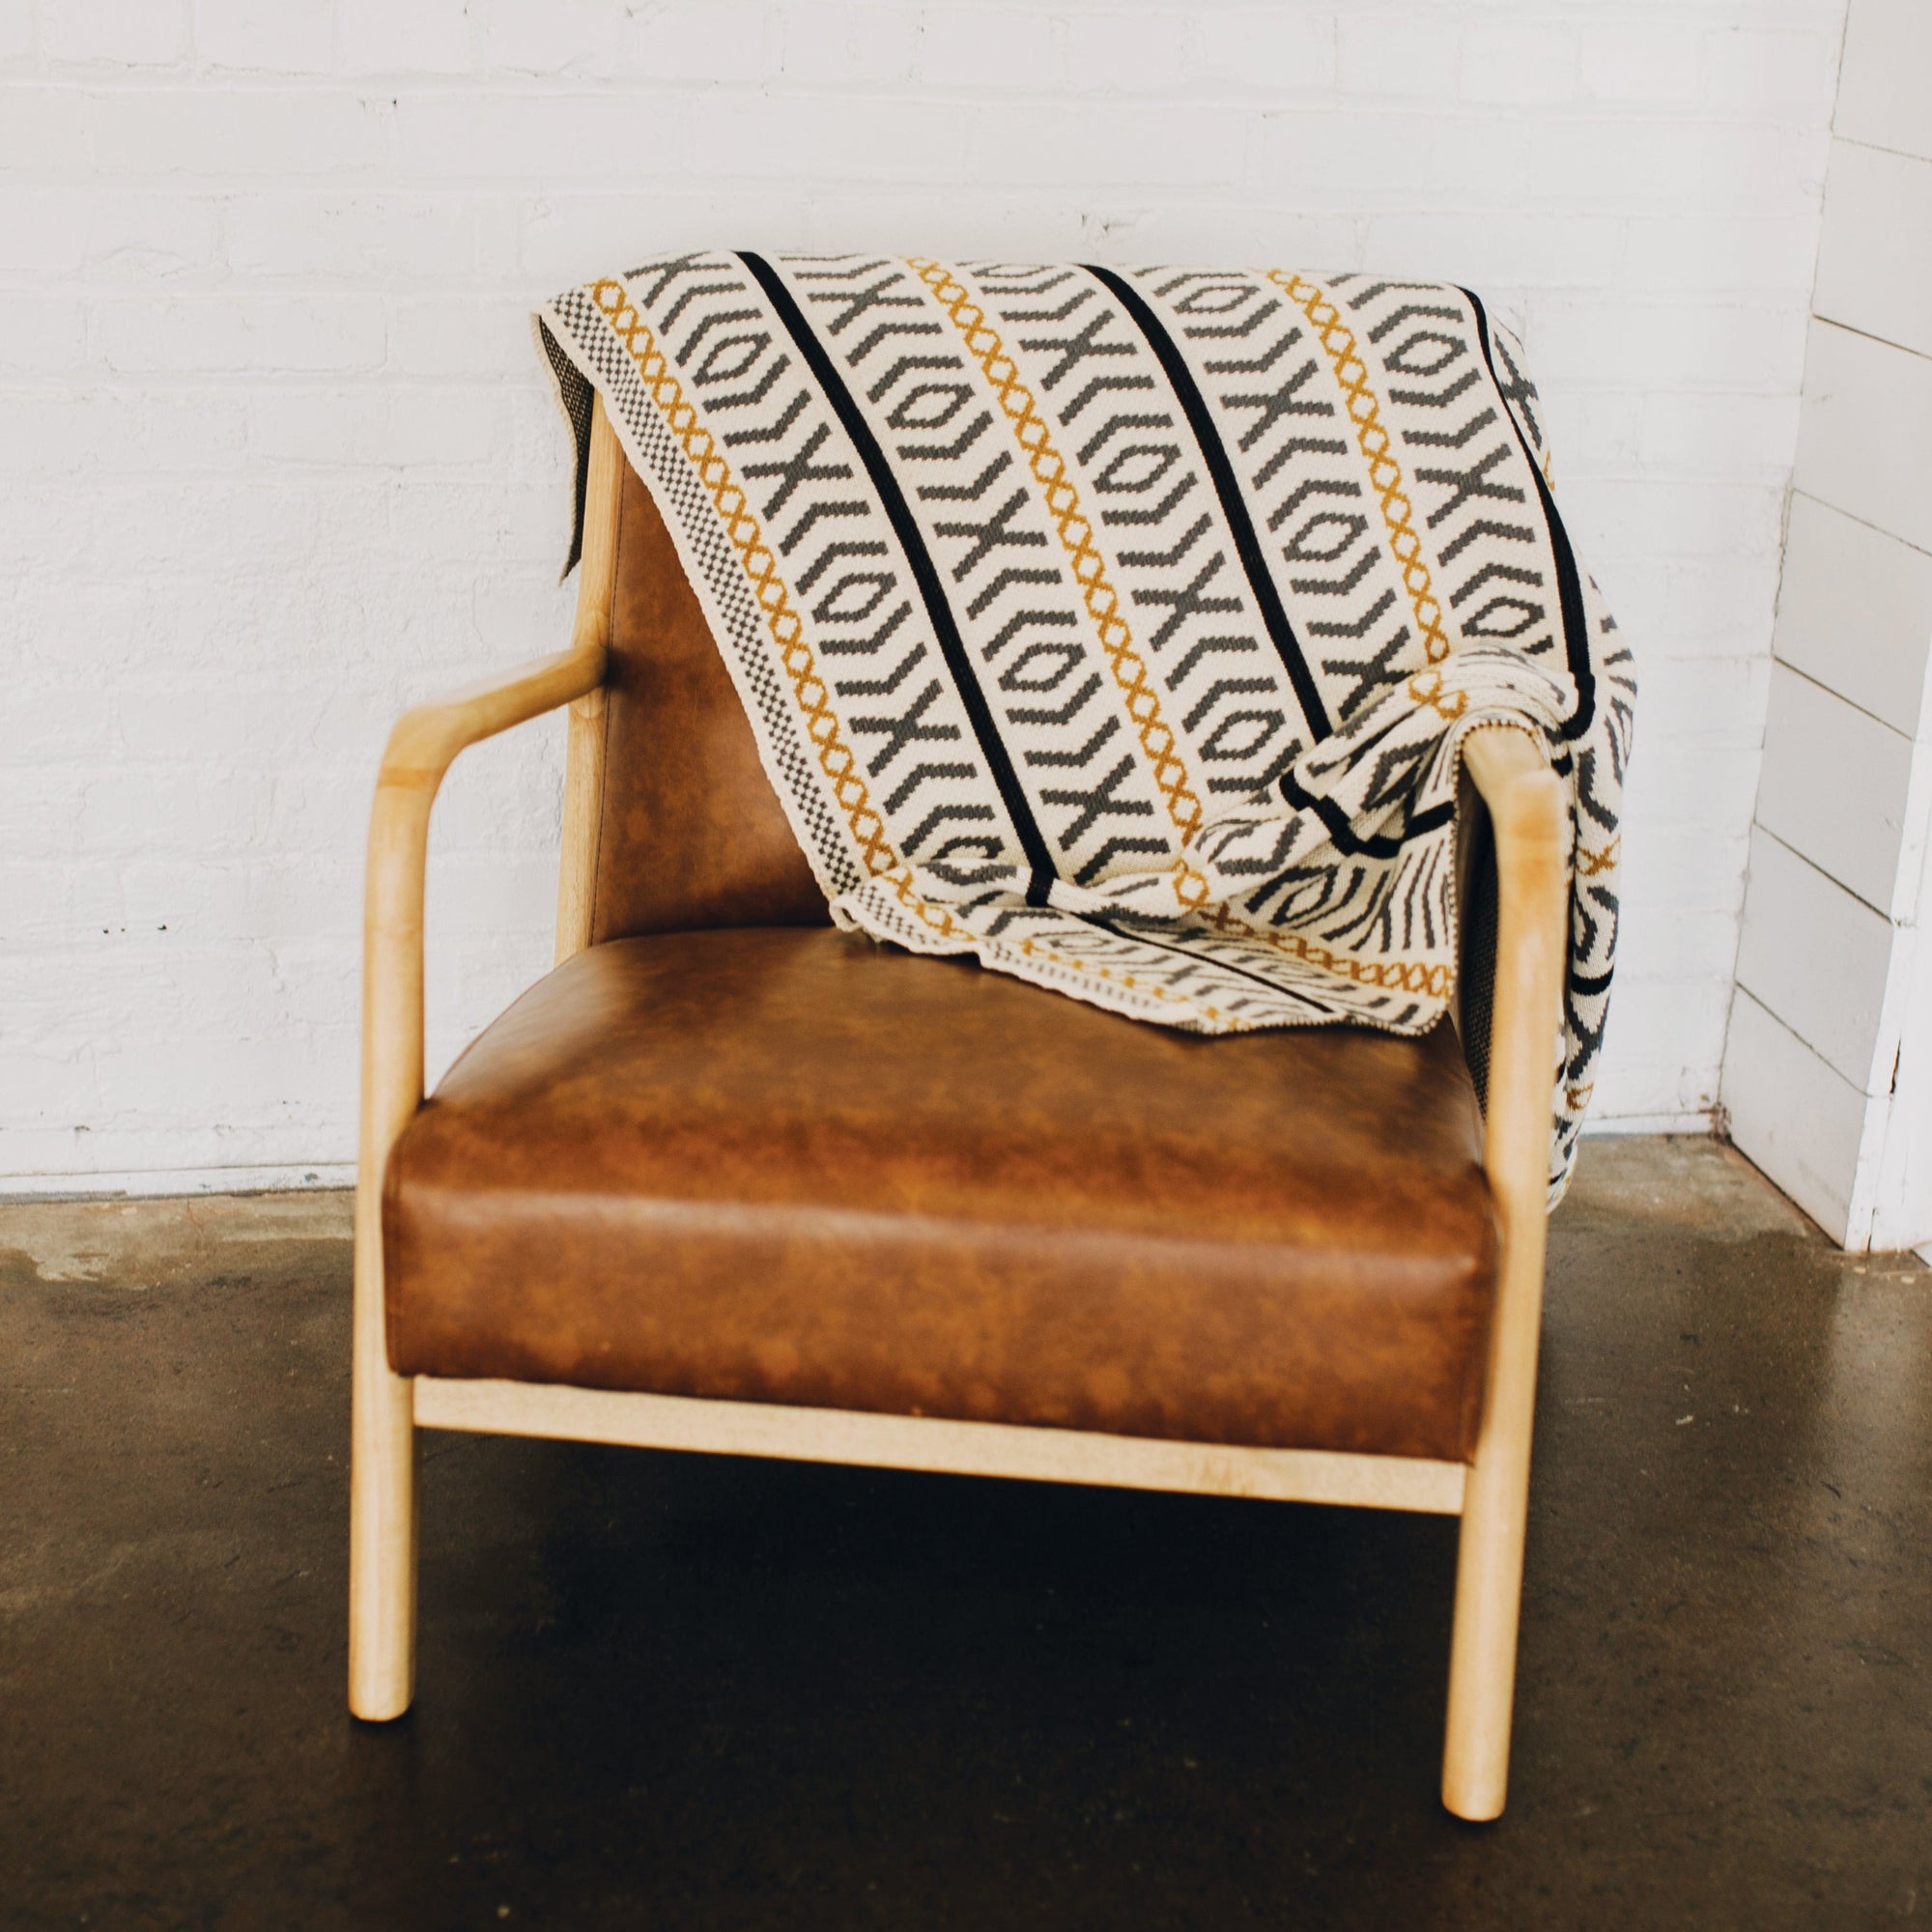 Seek & Swoon Otok Throw draped over the back of a leather chair.